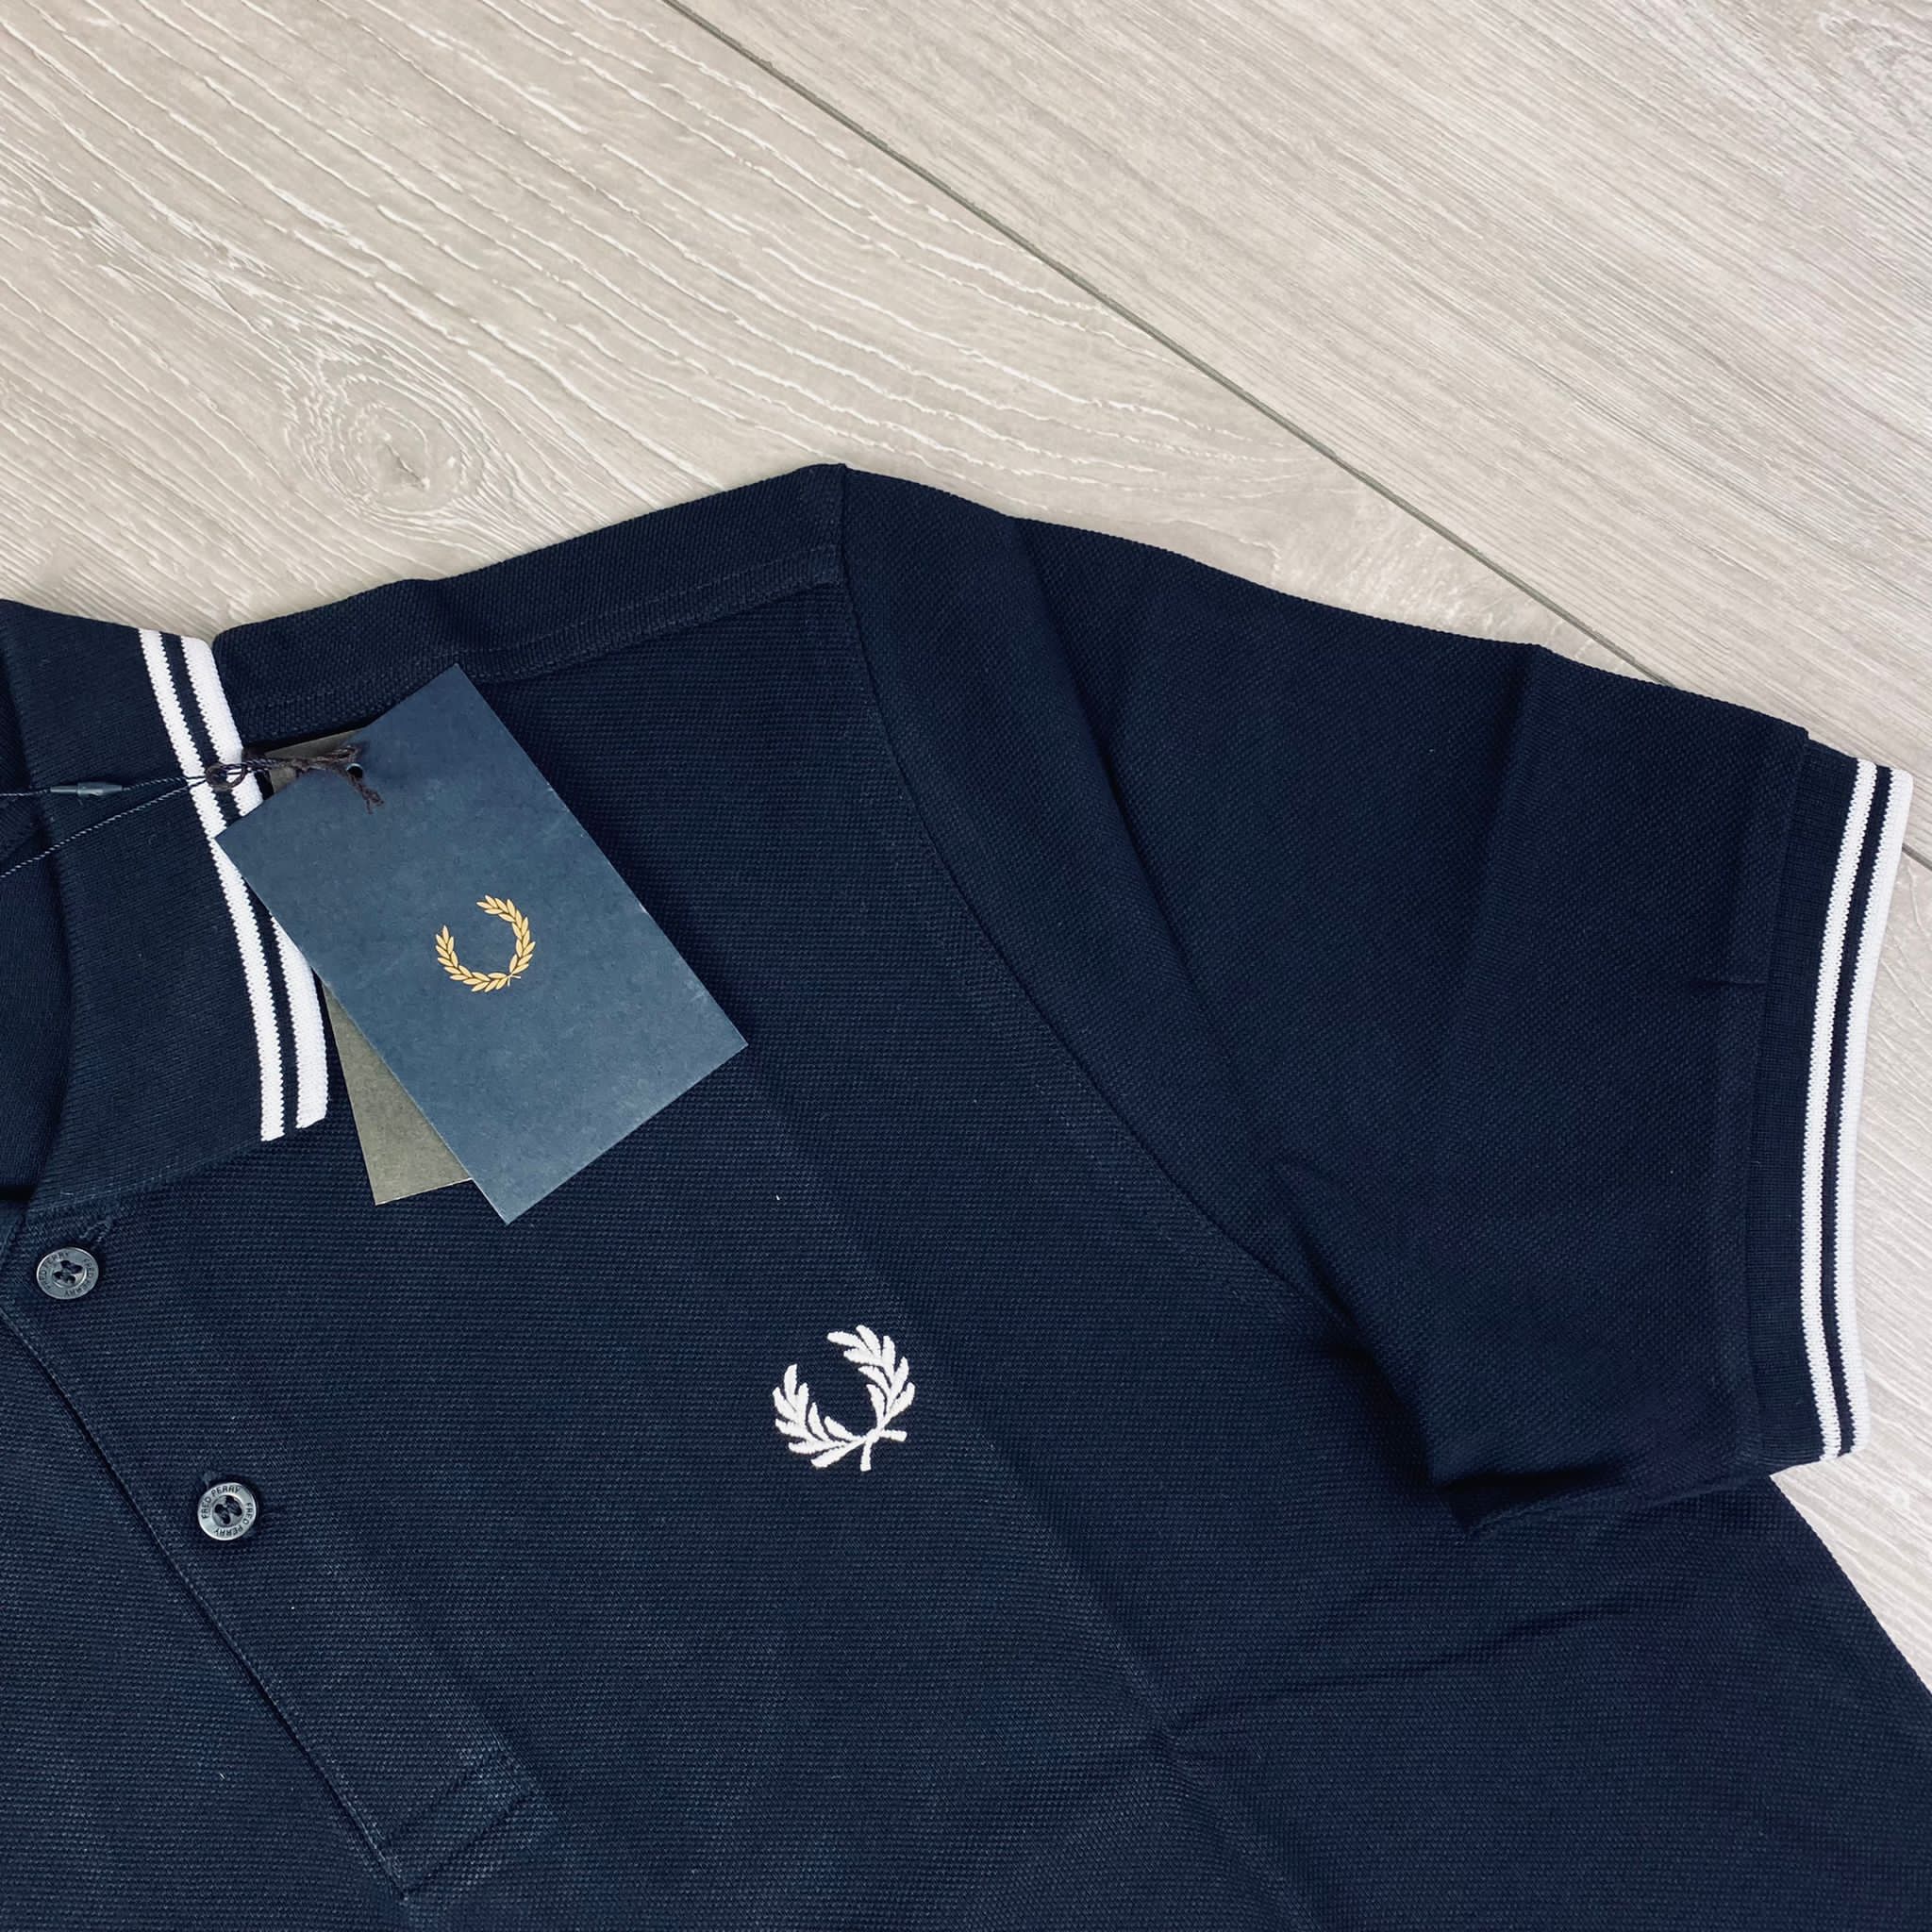 Fred Perry Wreath Polo Shirt